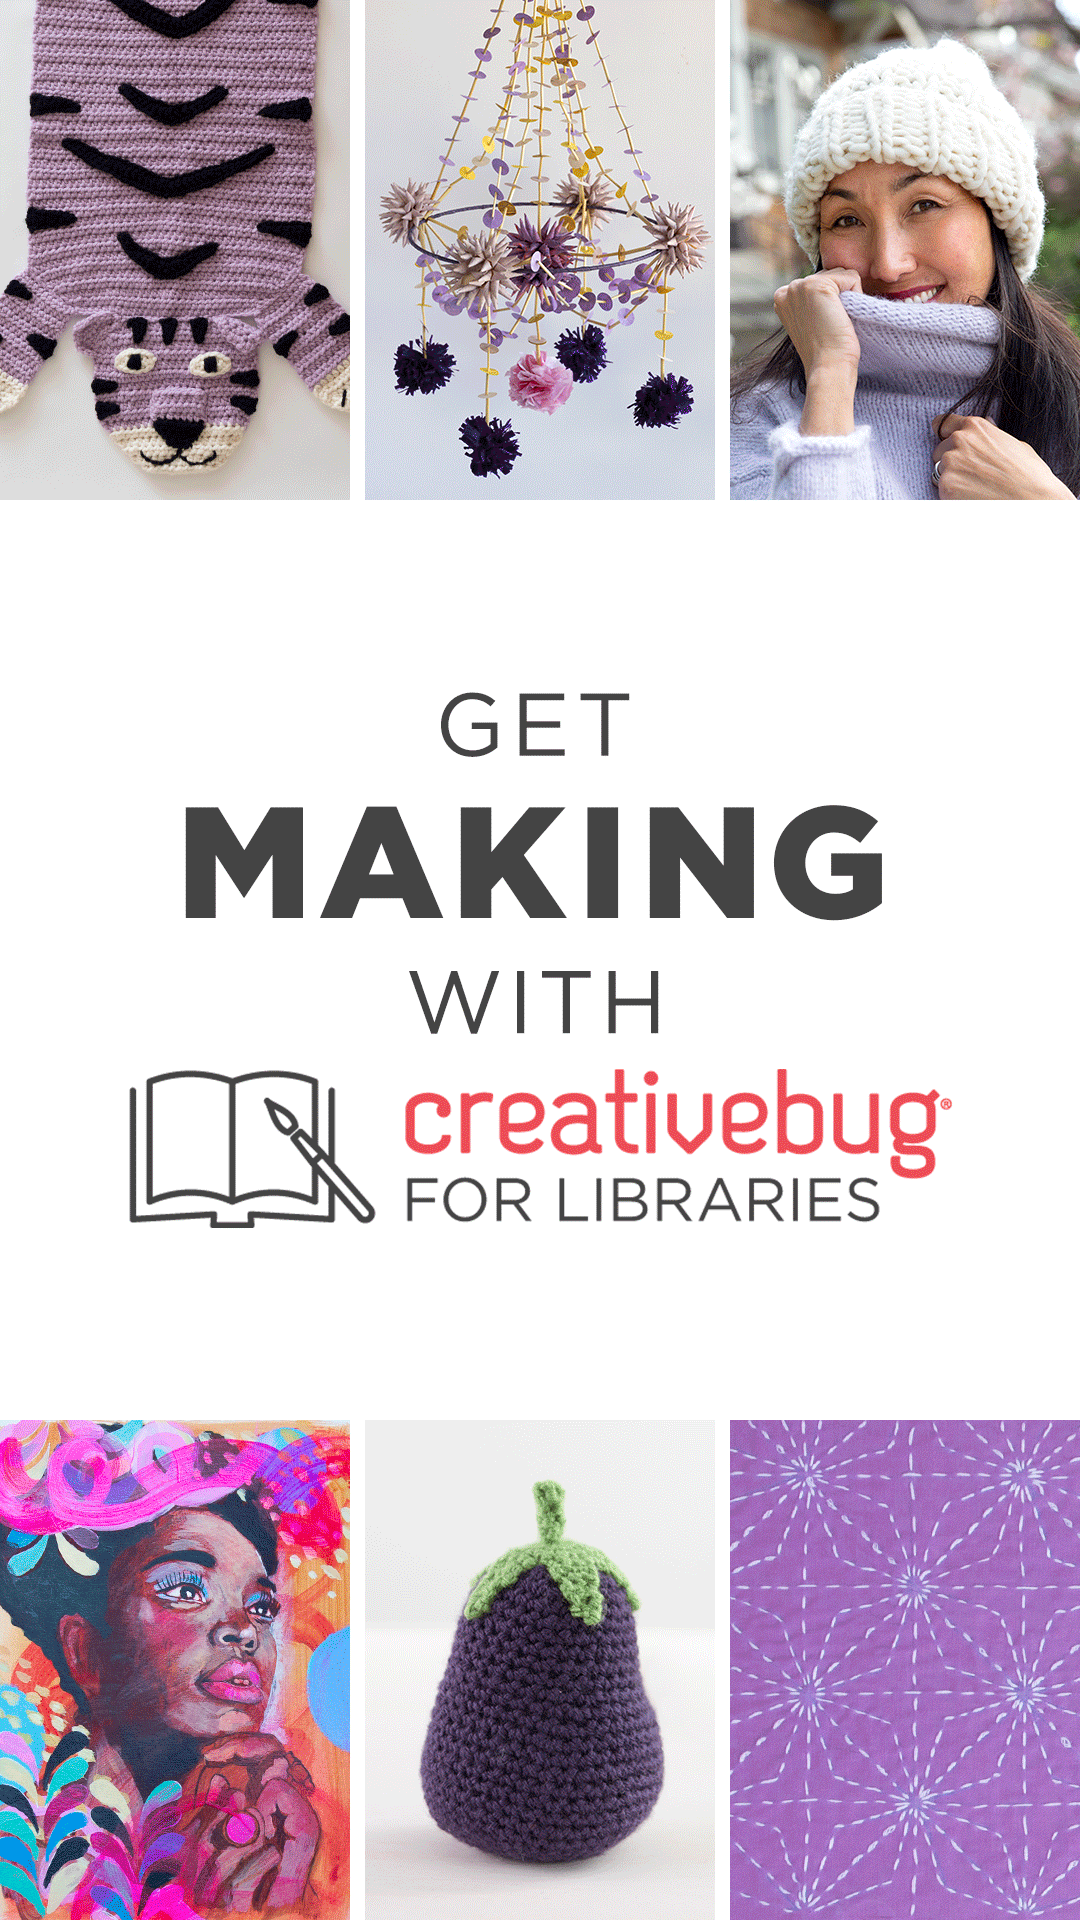 Free online art & craft classes now available through the FDL Public Library